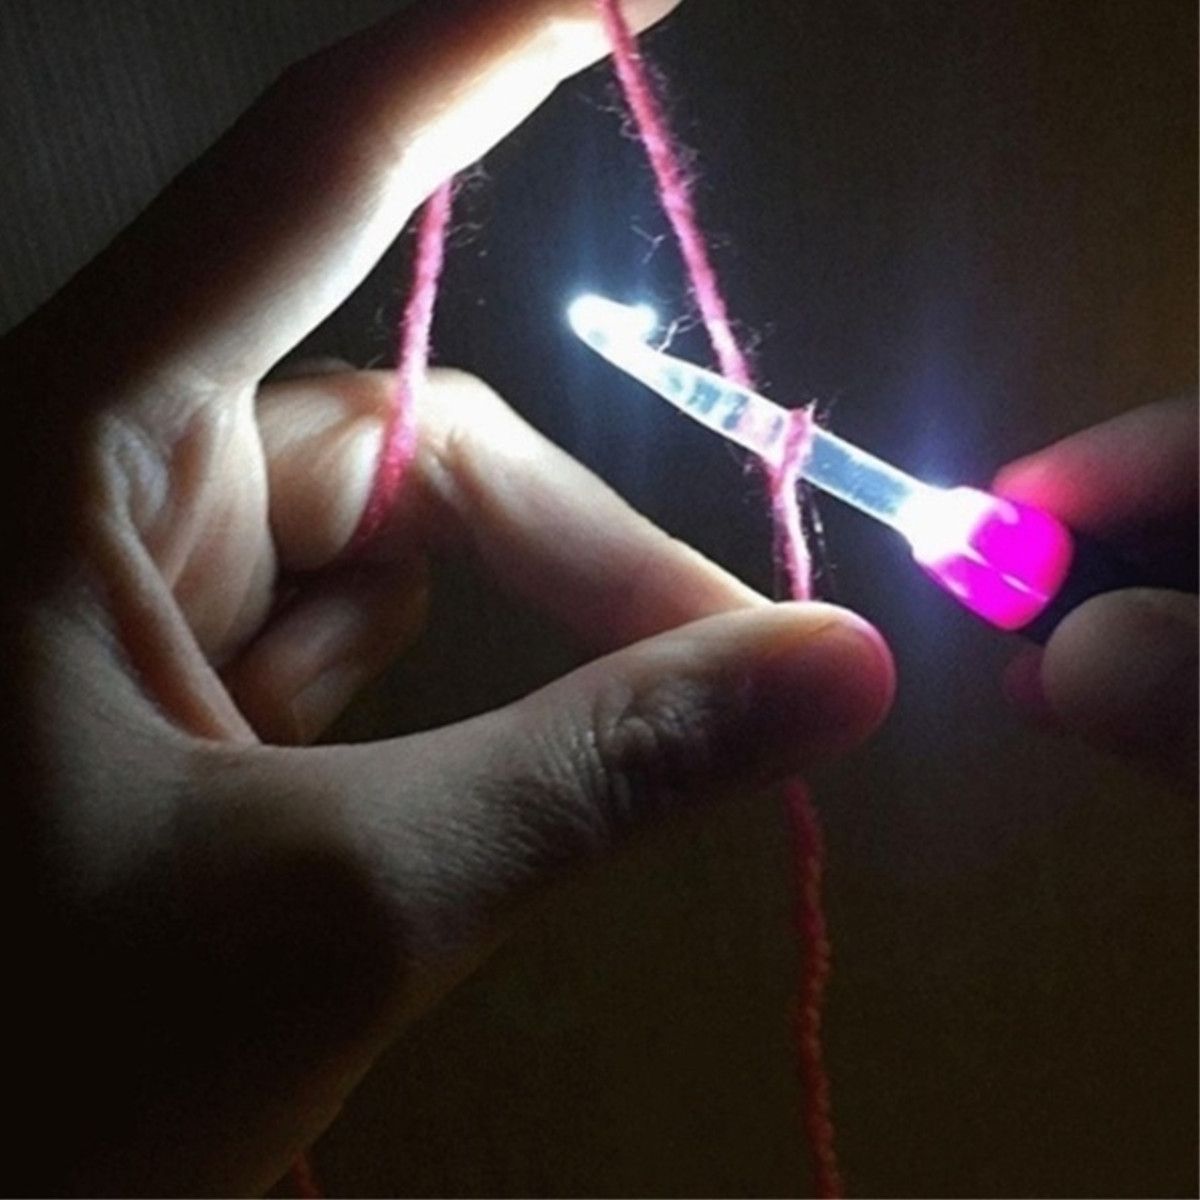 11-In-1-USB-LED-Light-Knitted-Crochet-Kit-DIY-Weaving-Tool-Kits-Sweater-Sewing-Accessories-DIY-LED-F-1586130